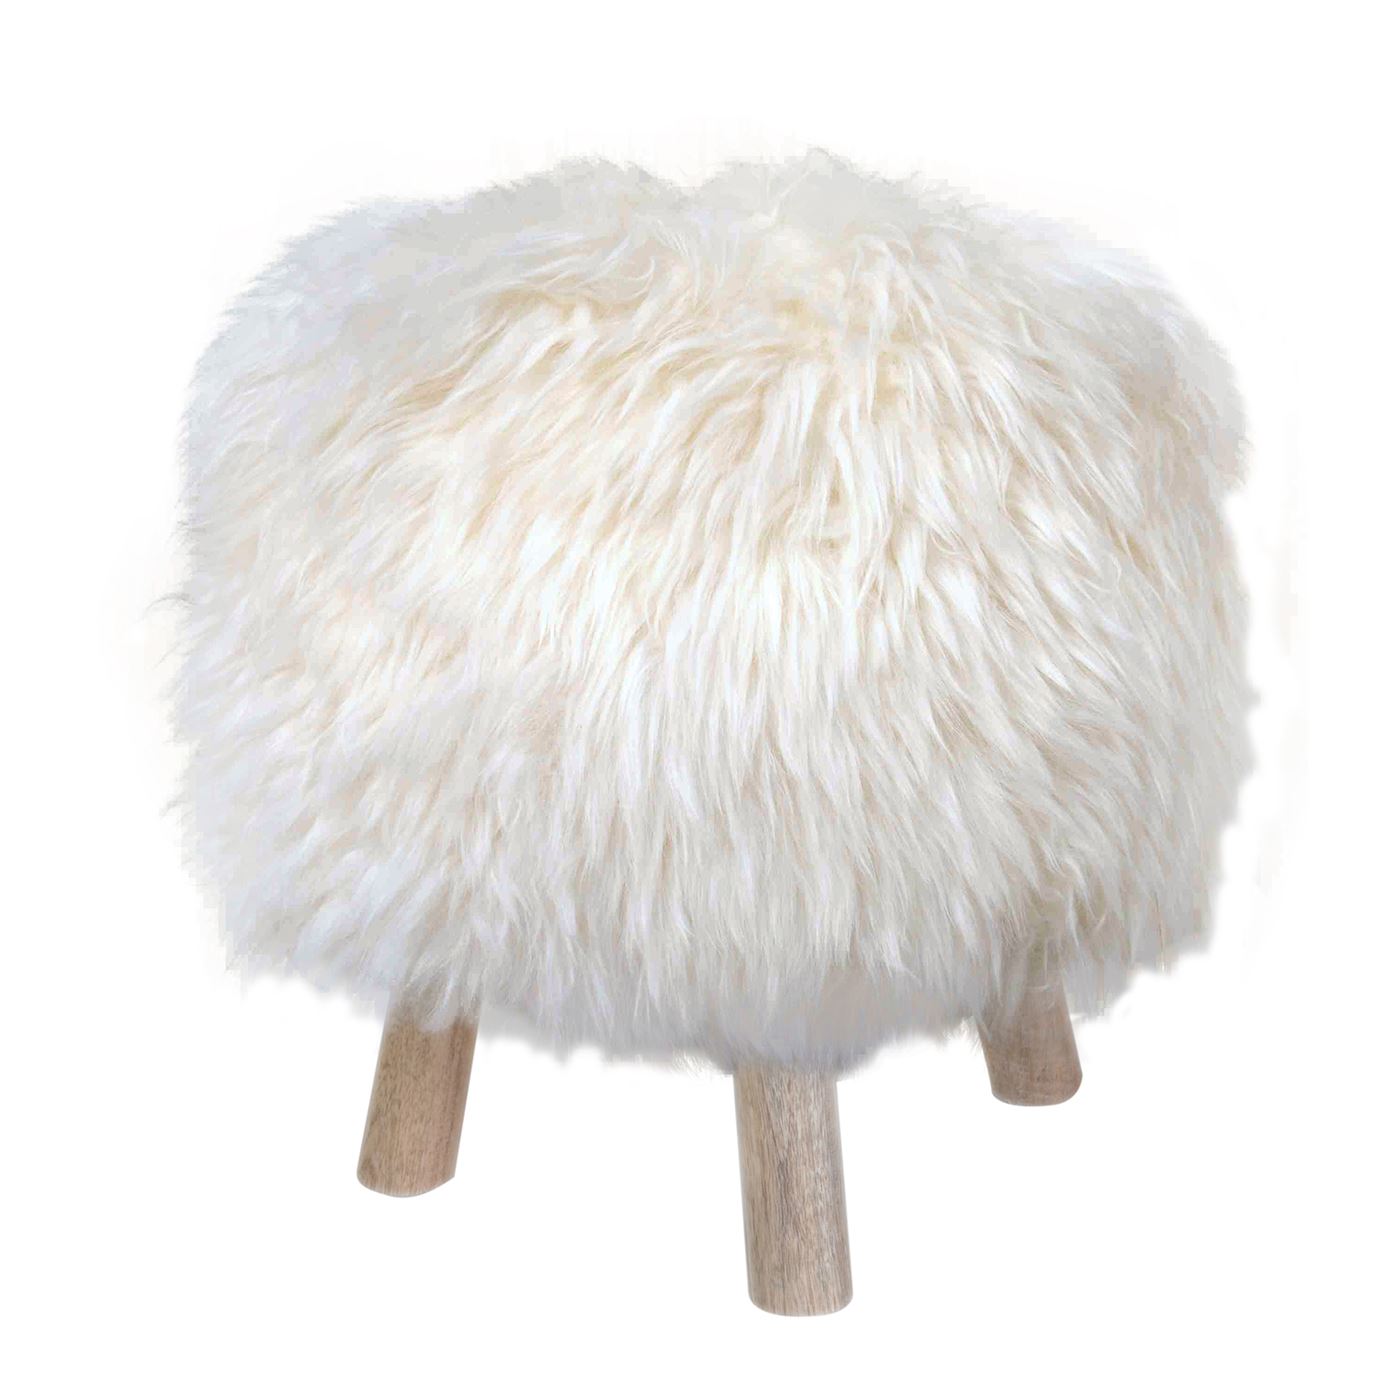 Nordic Stool, Sheep Hide, Natural White, Hm Stitching, Flat Weave 